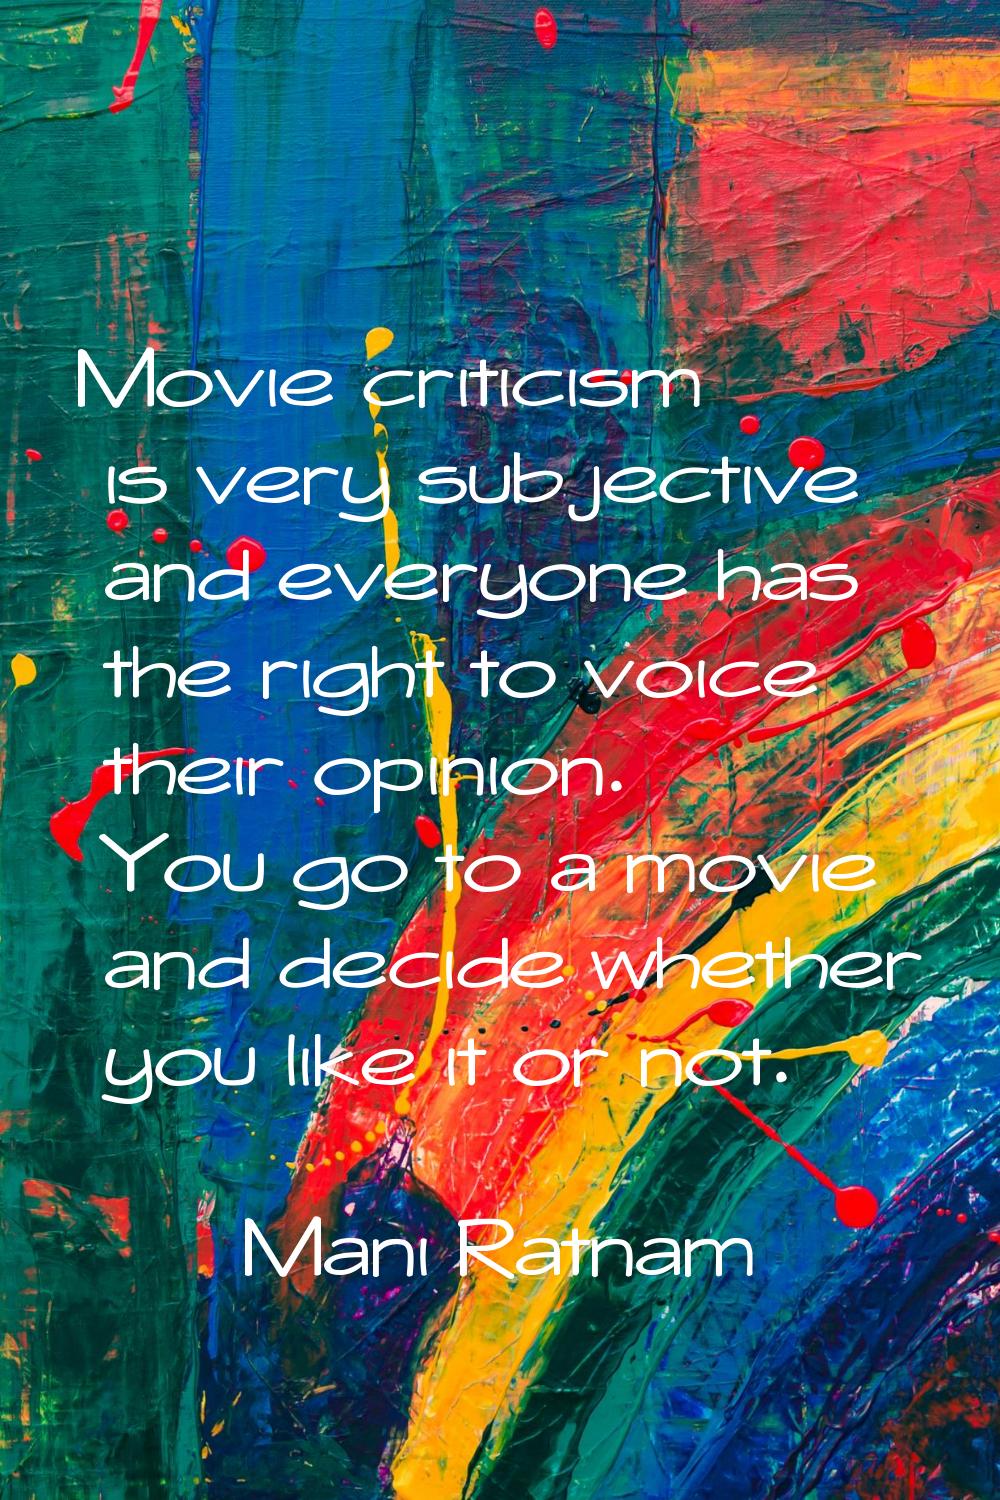 Movie criticism is very subjective and everyone has the right to voice their opinion. You go to a m